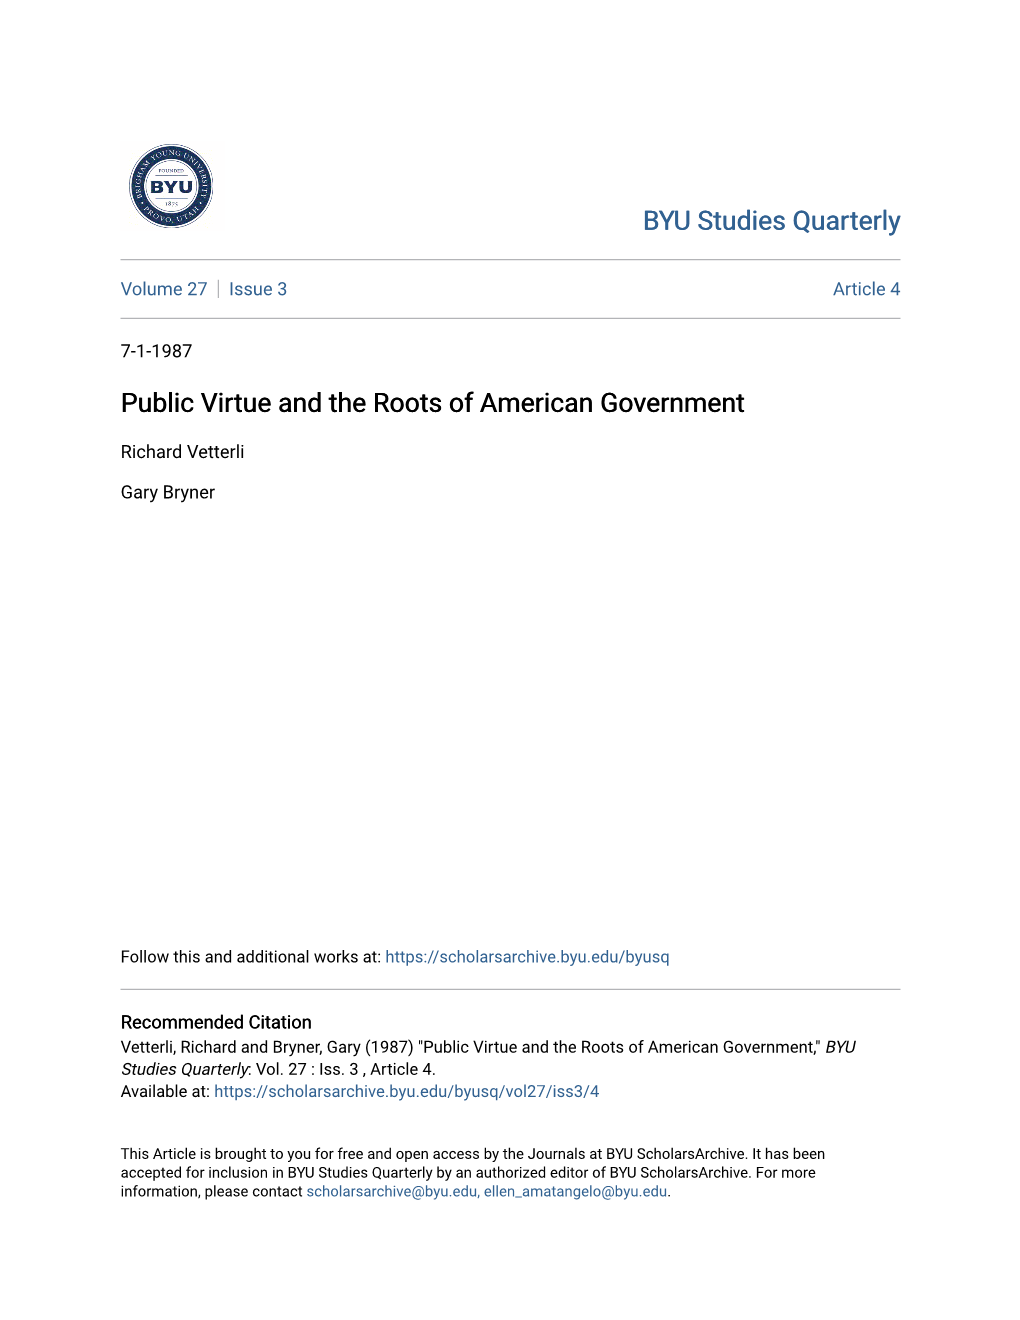 Public Virtue and the Roots of American Government